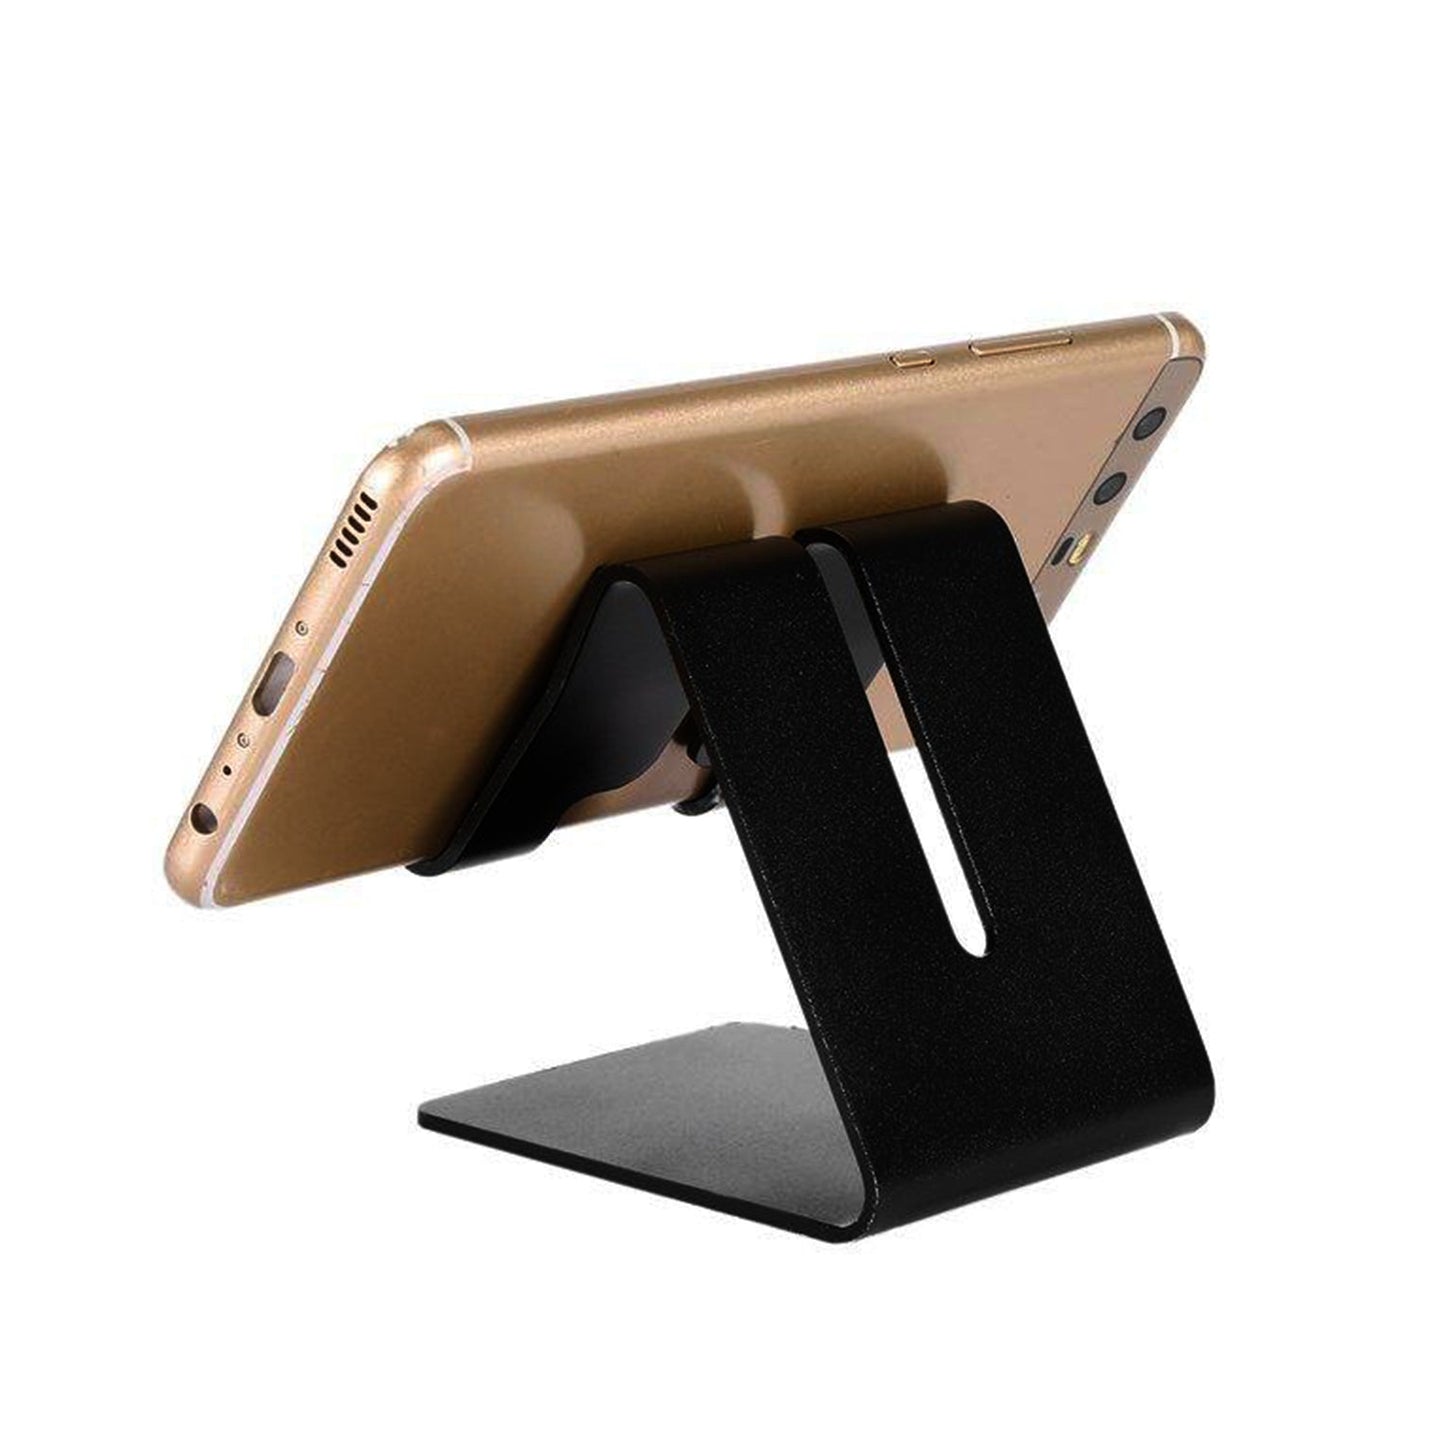 6149 Mobile Metal Stand widely used to give a stand and support for smartphones etc, at any place and any time purposes.